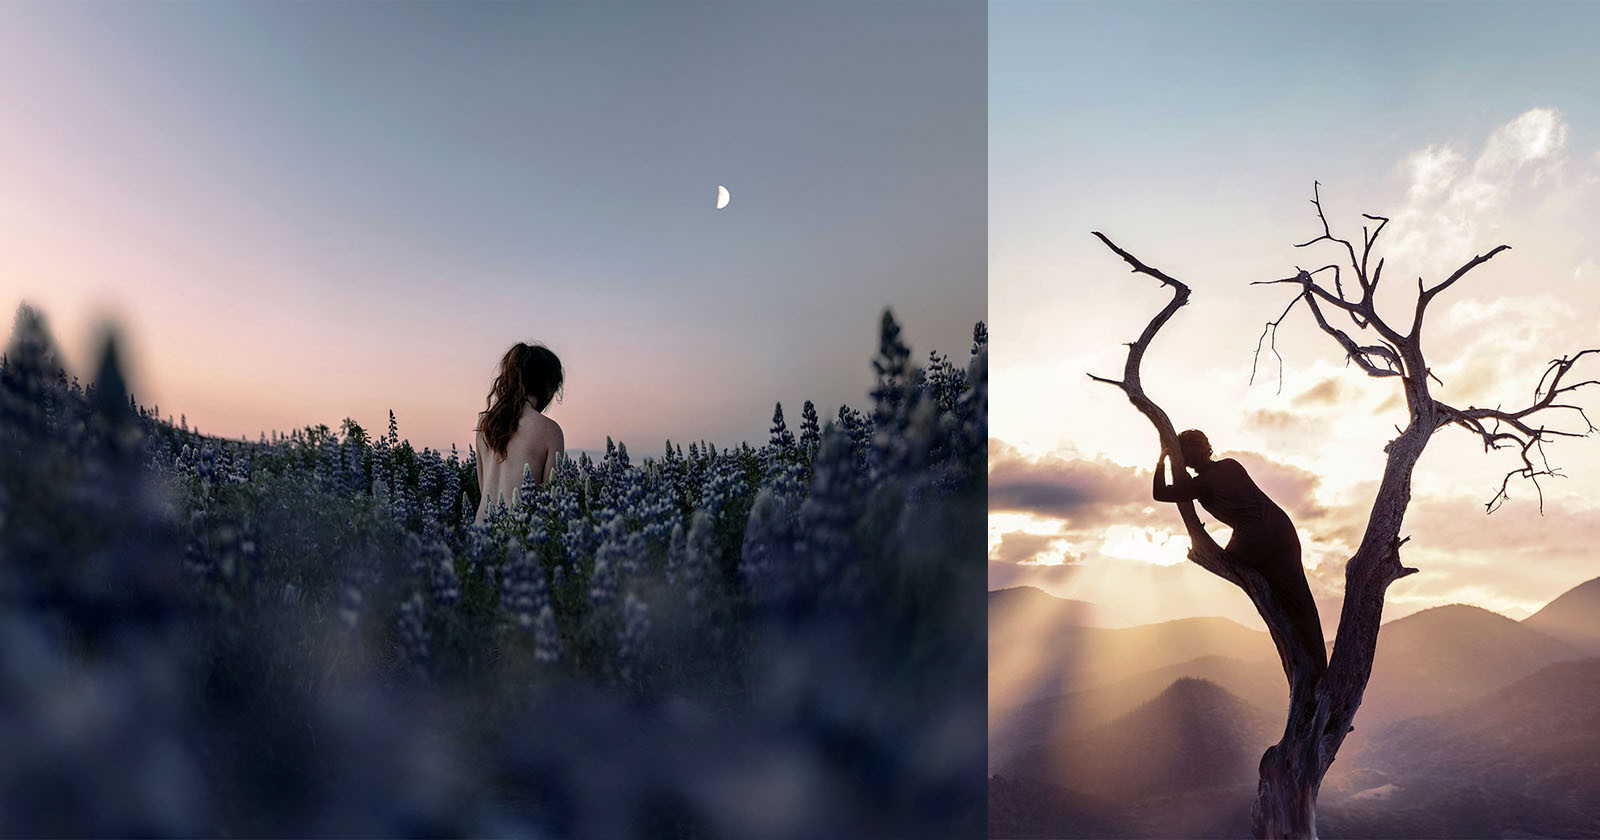 Photographer Aims to Capture Her Wild Soul in Evocative Self Portraits